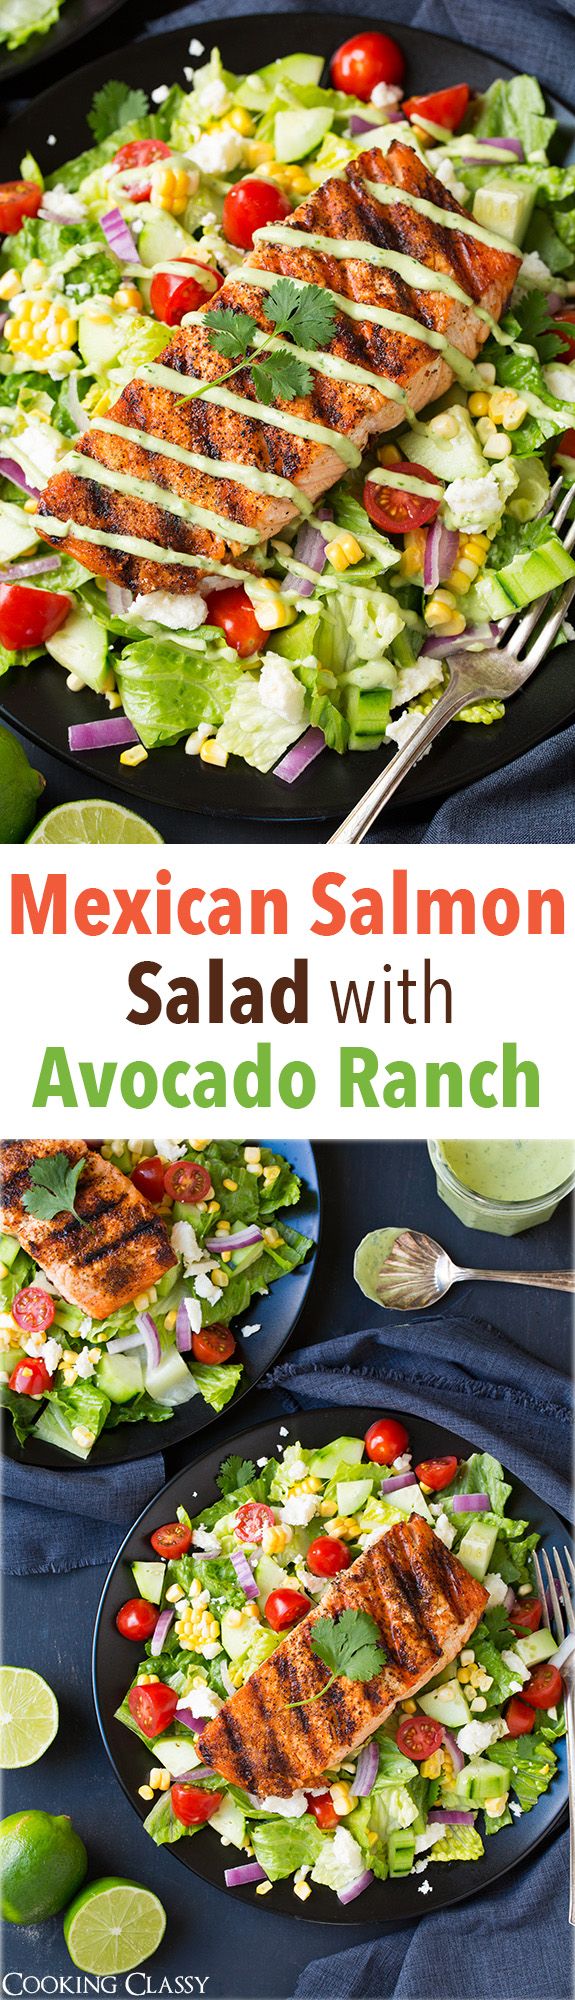 Mexican Grilled Salmon Salad